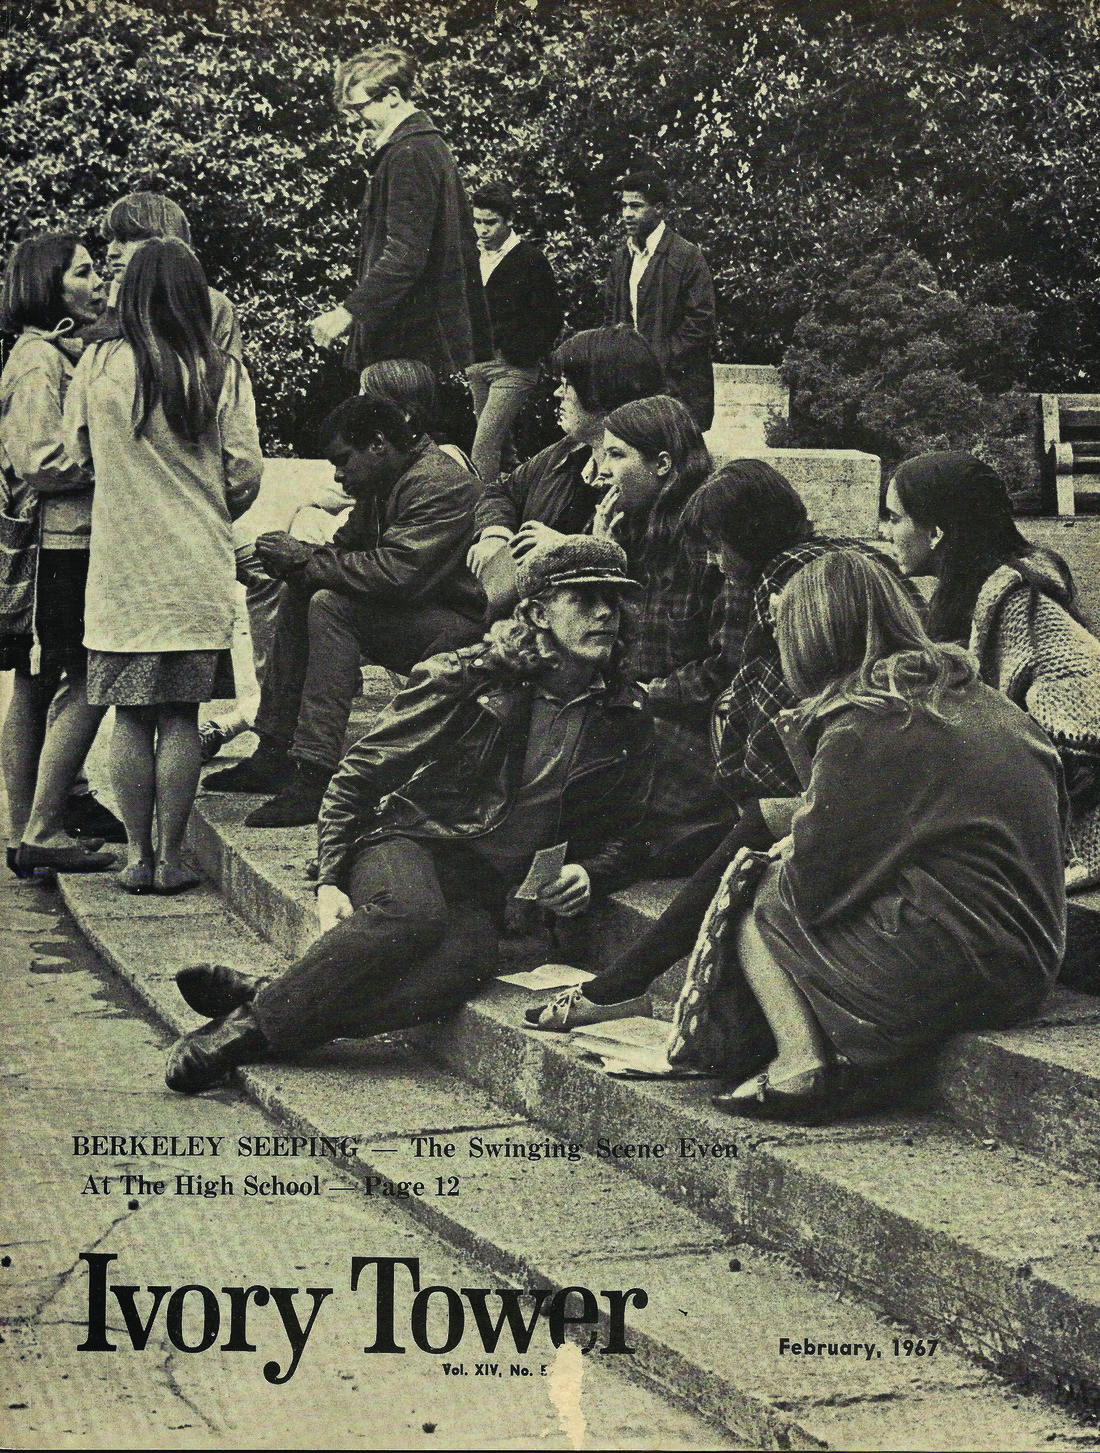 Photo of students sitting on steps circa 1967